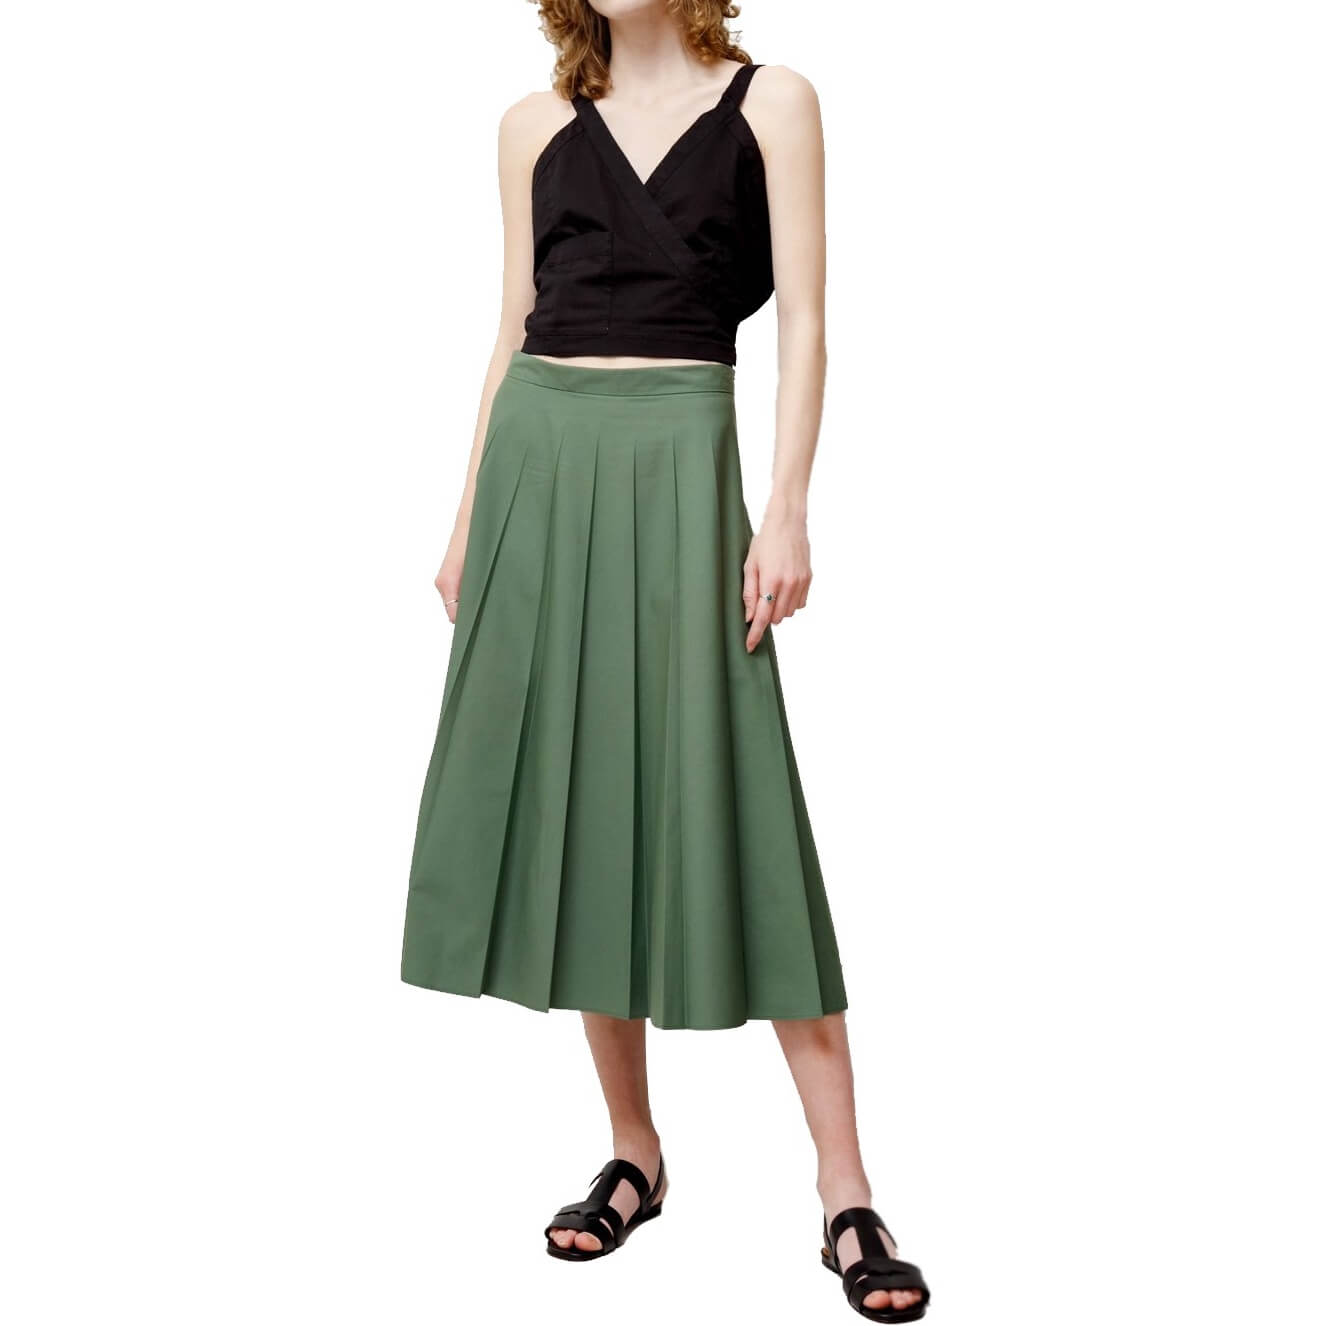 Margaret Howell Fade Out Pleat Cotton-Blend Skirt